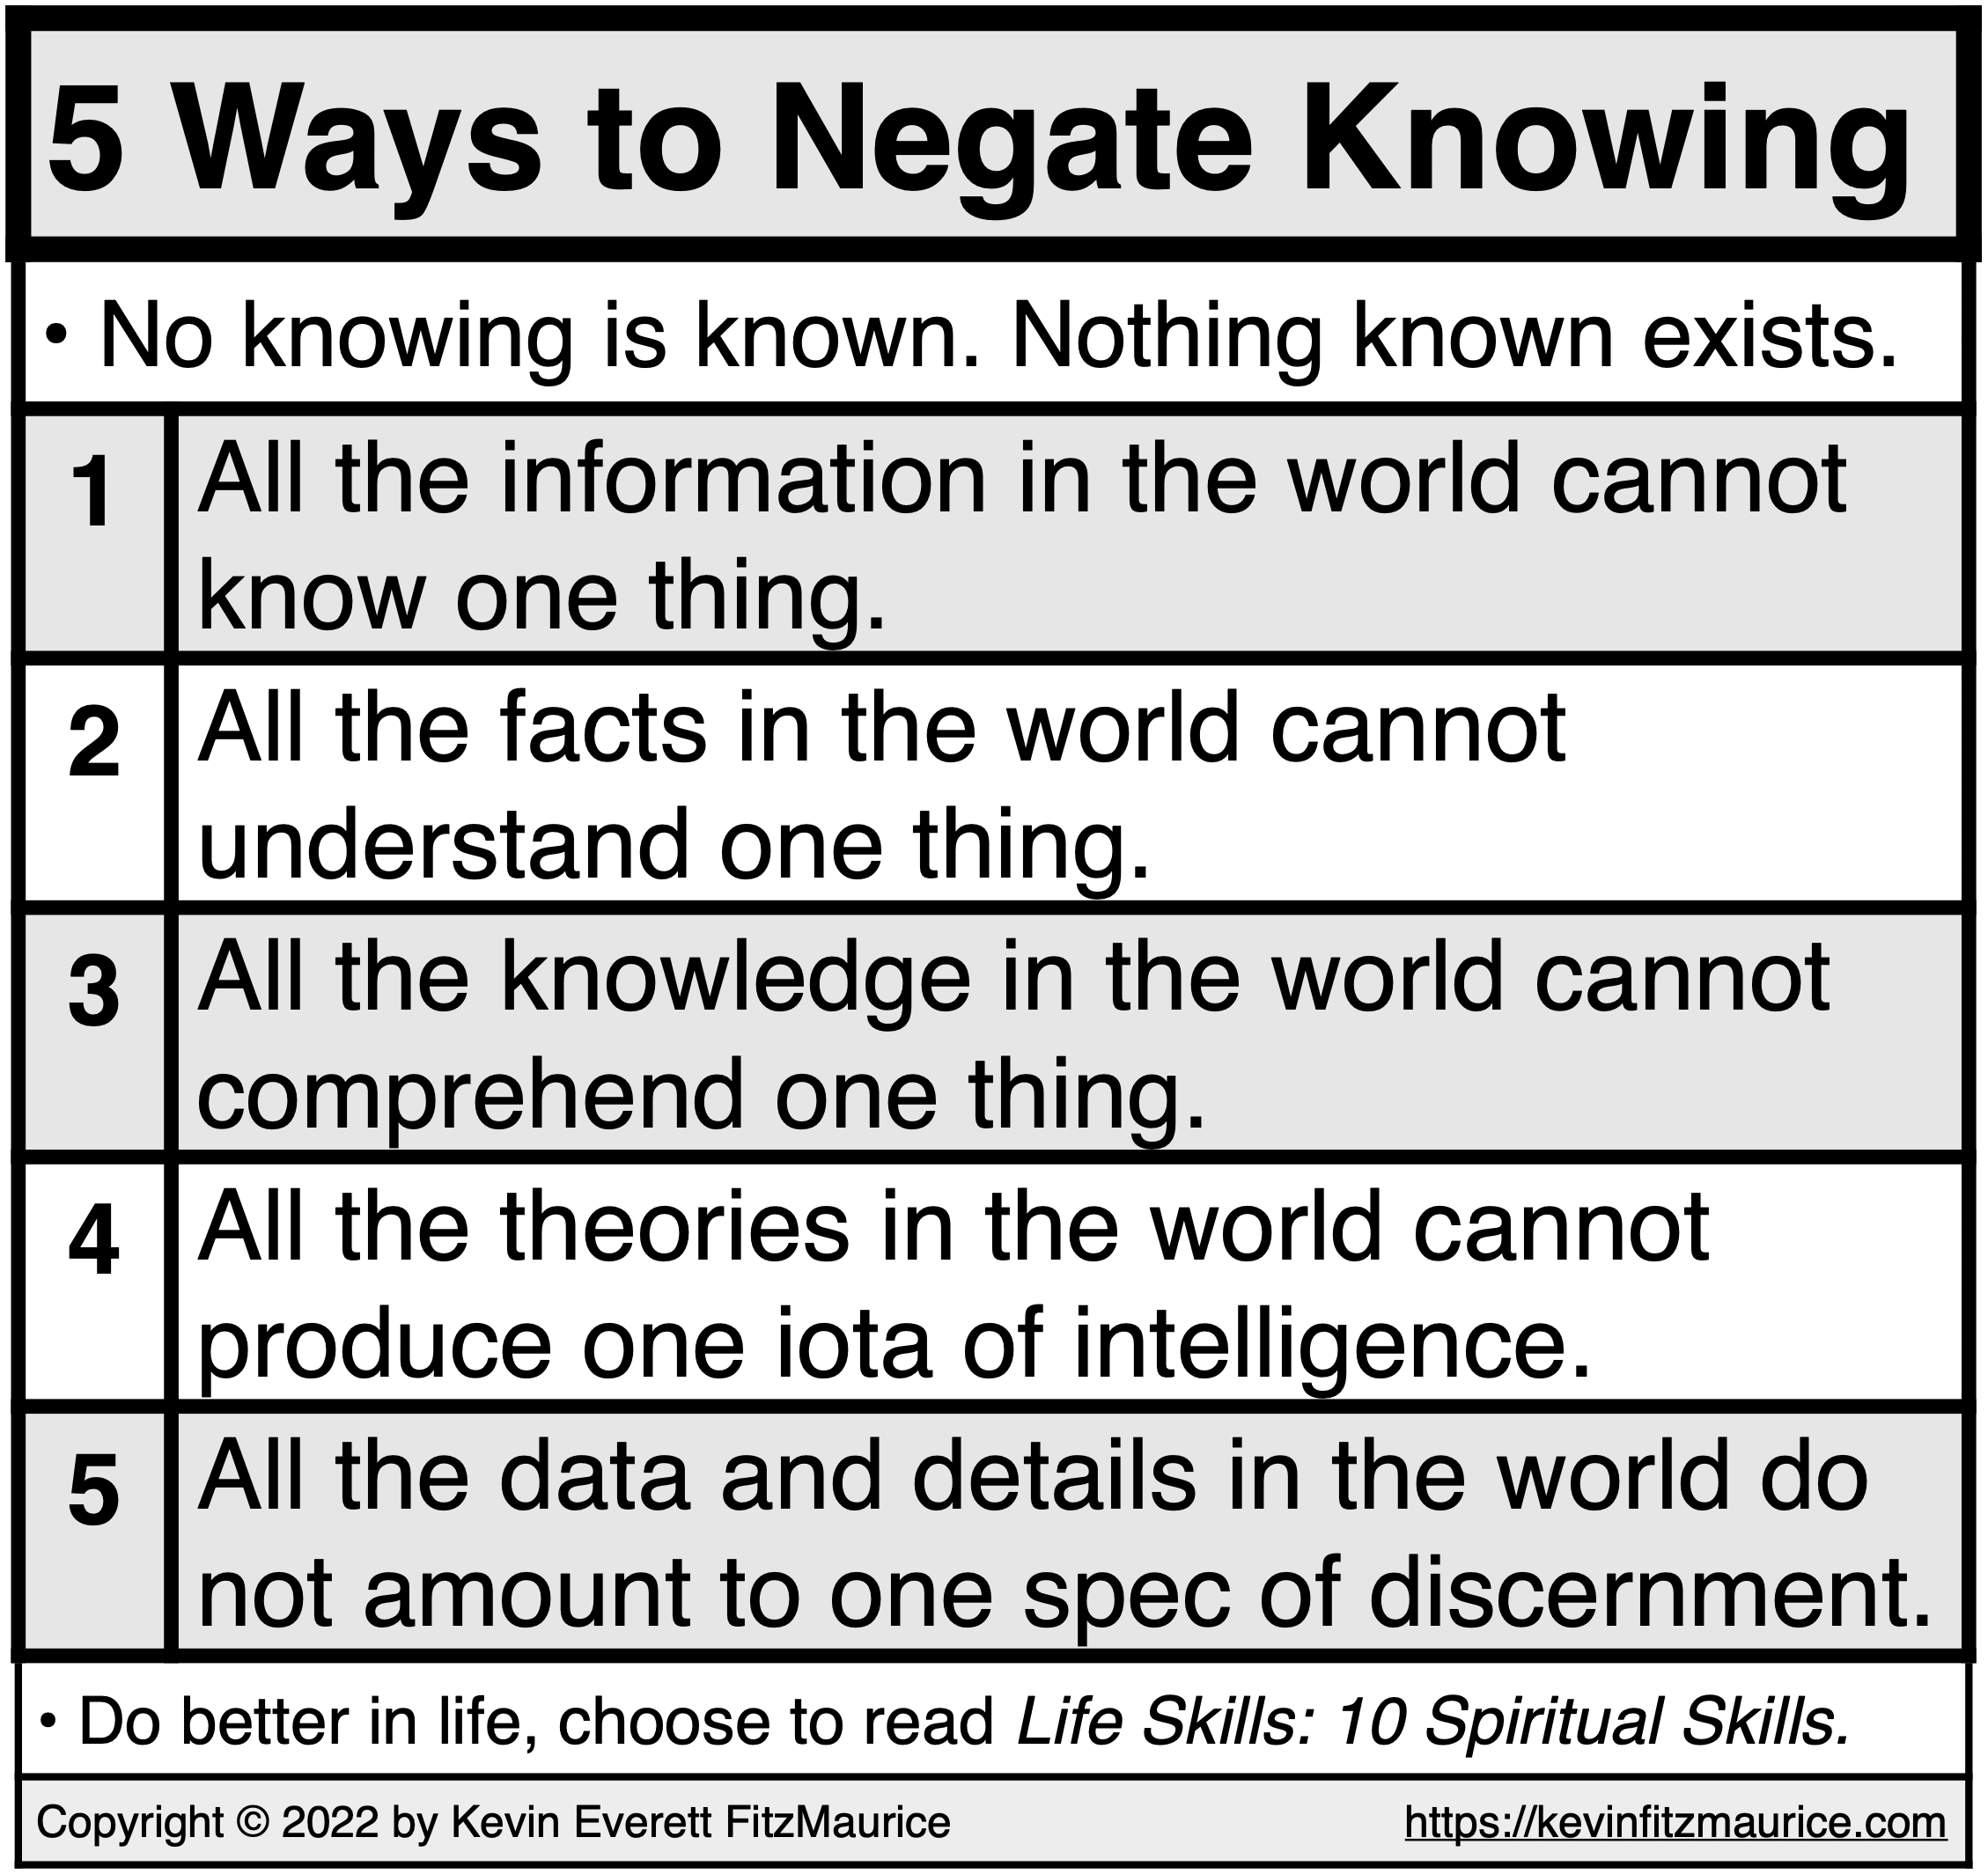 5 Ways to Negate Knowing